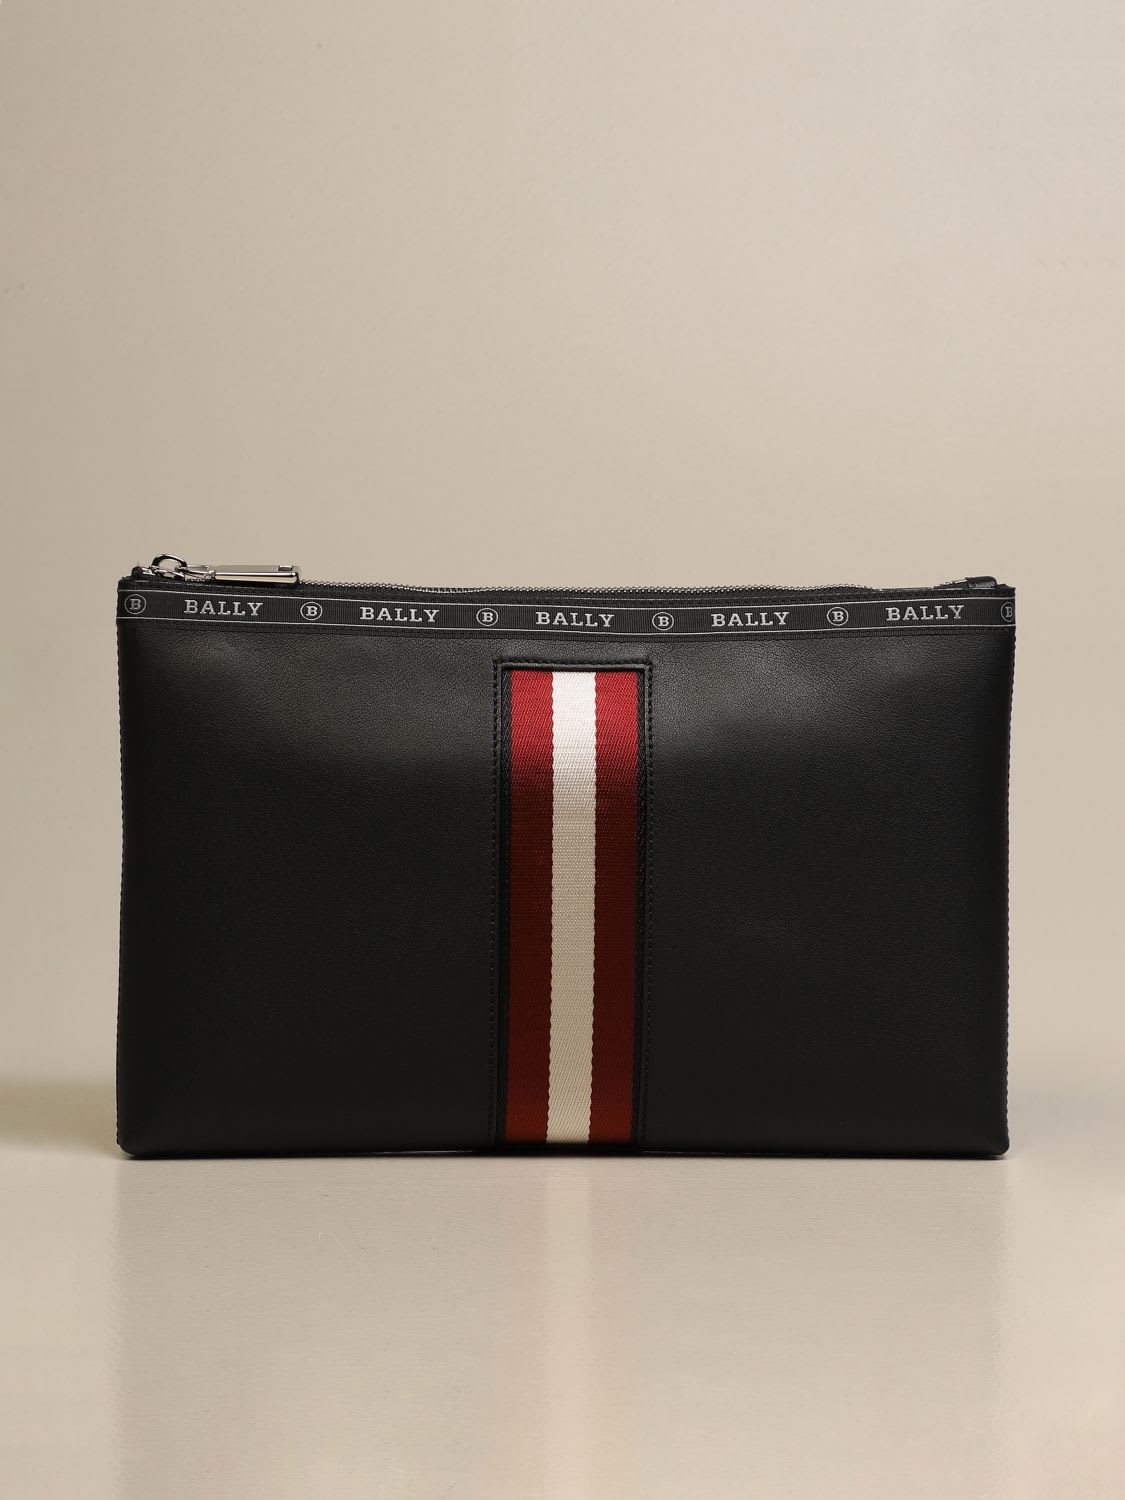 Bally Briefcase Hartland Bally Clutch Bag In Leather With Trainspotting Canvas Band